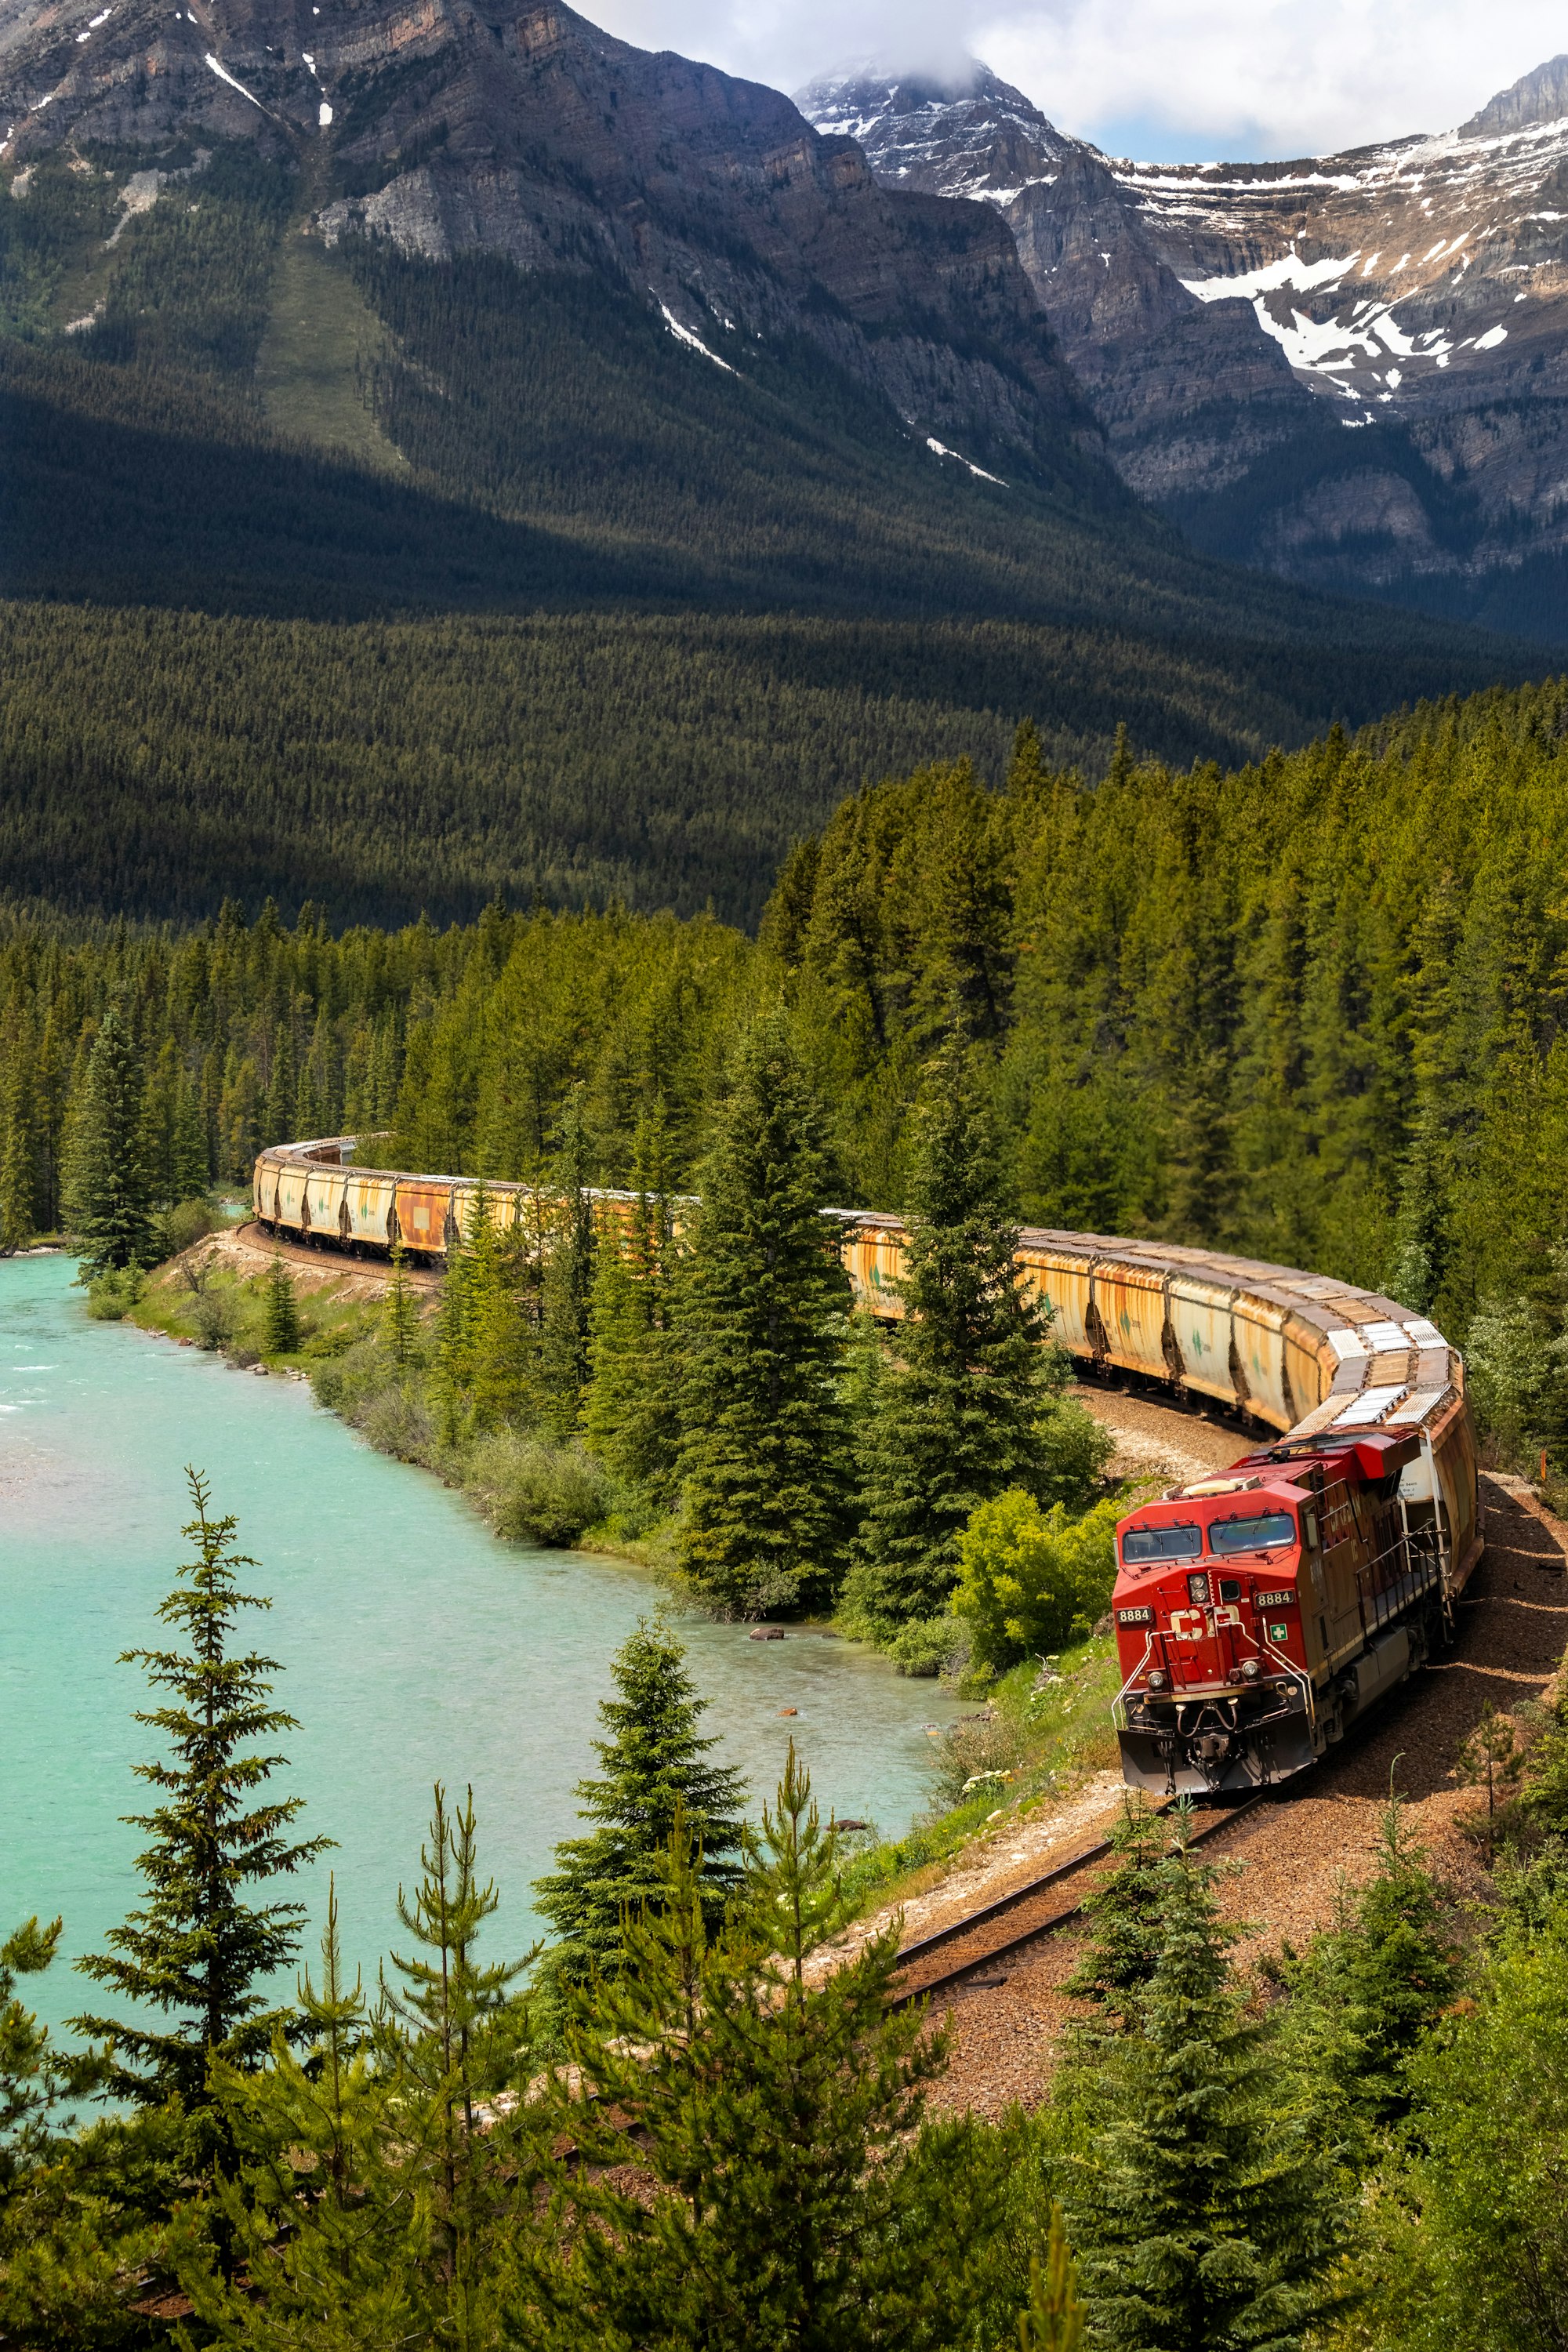 A freight train winds it way along a river through a pine forest.